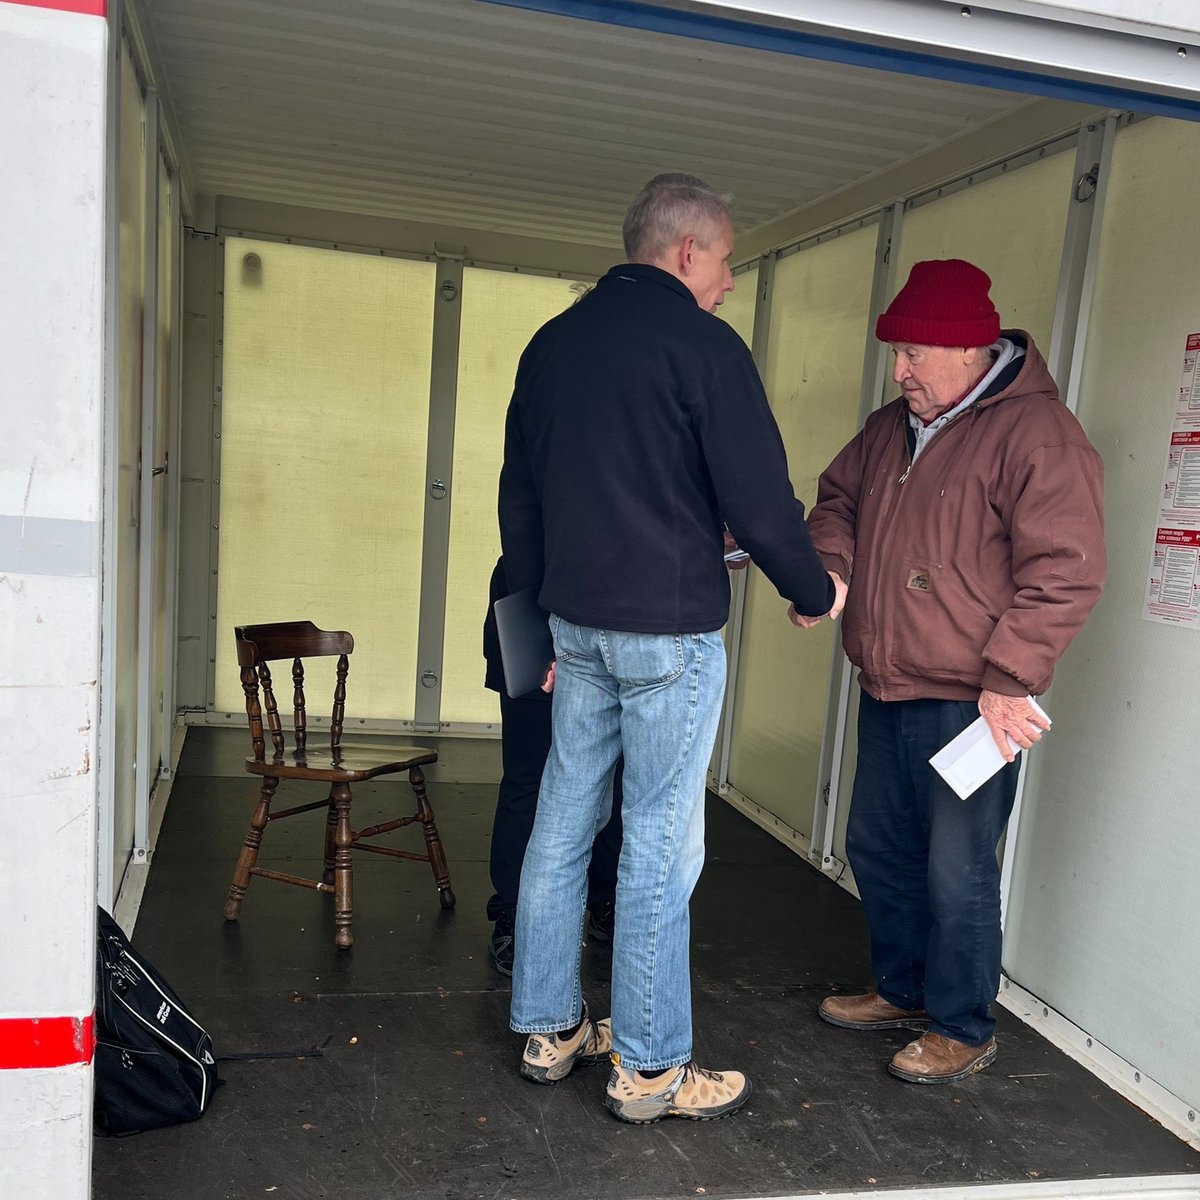 Norman & his wife Janet live in Saint Wendel in Posey County. On Tuesday morning, they awoke to the sounds of the storm. When Janet opened her eyes, all she saw was the sky where her ceiling used to be. Our volunteers met with them to assess their needs and provide assistance.